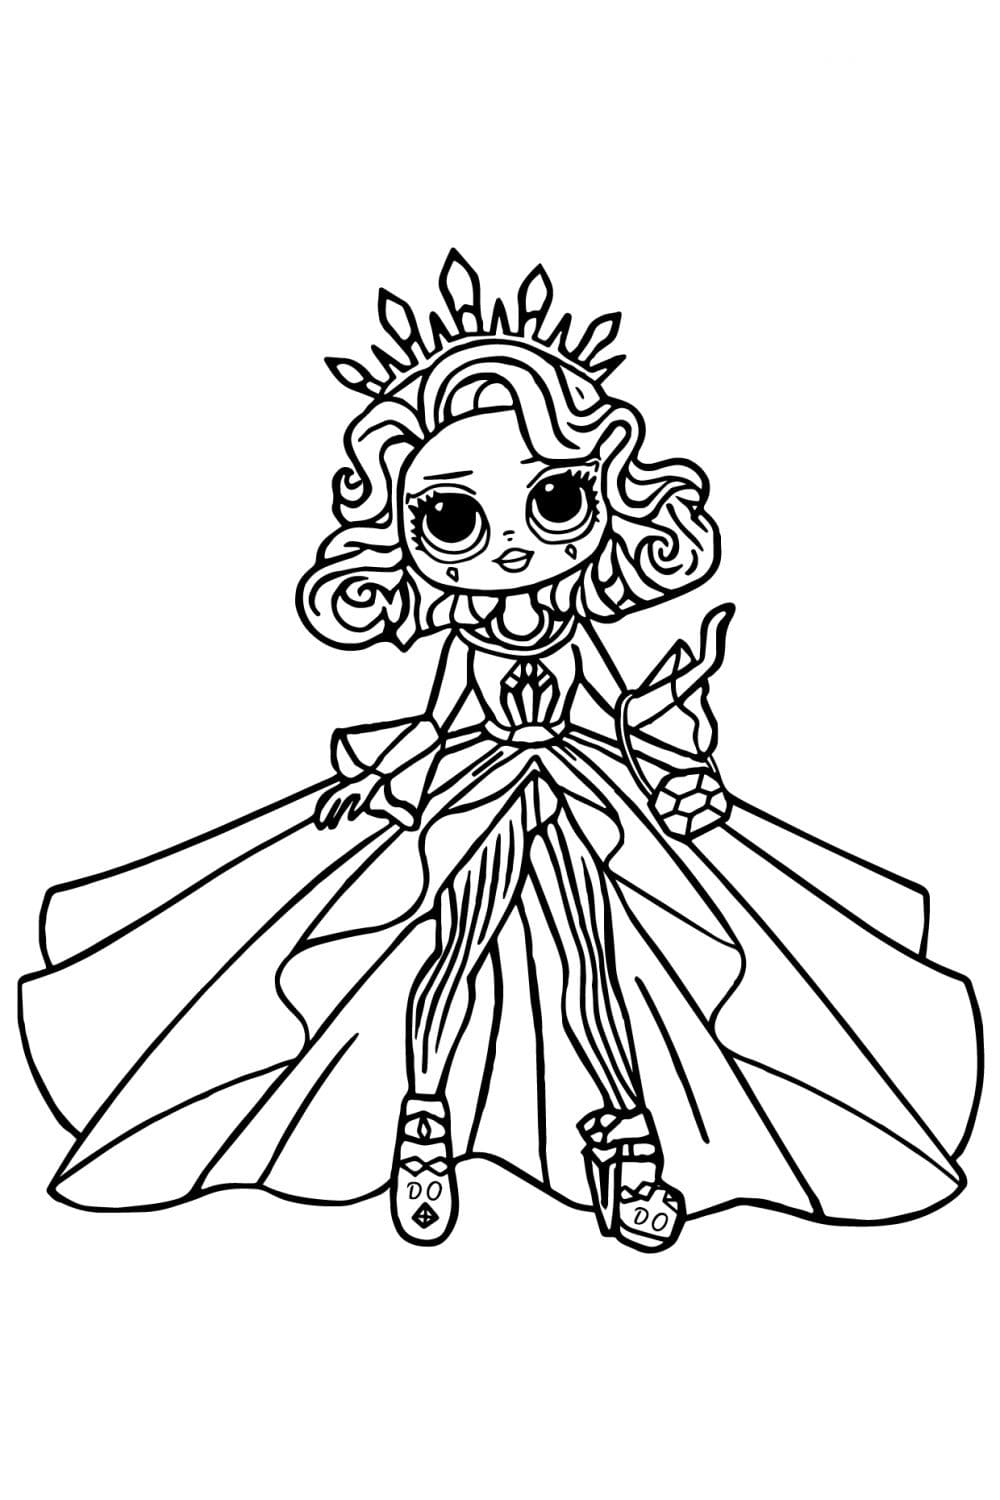 LOL OMG Queen Crystal Coloring Page - Free Printable Coloring Pages for Kids